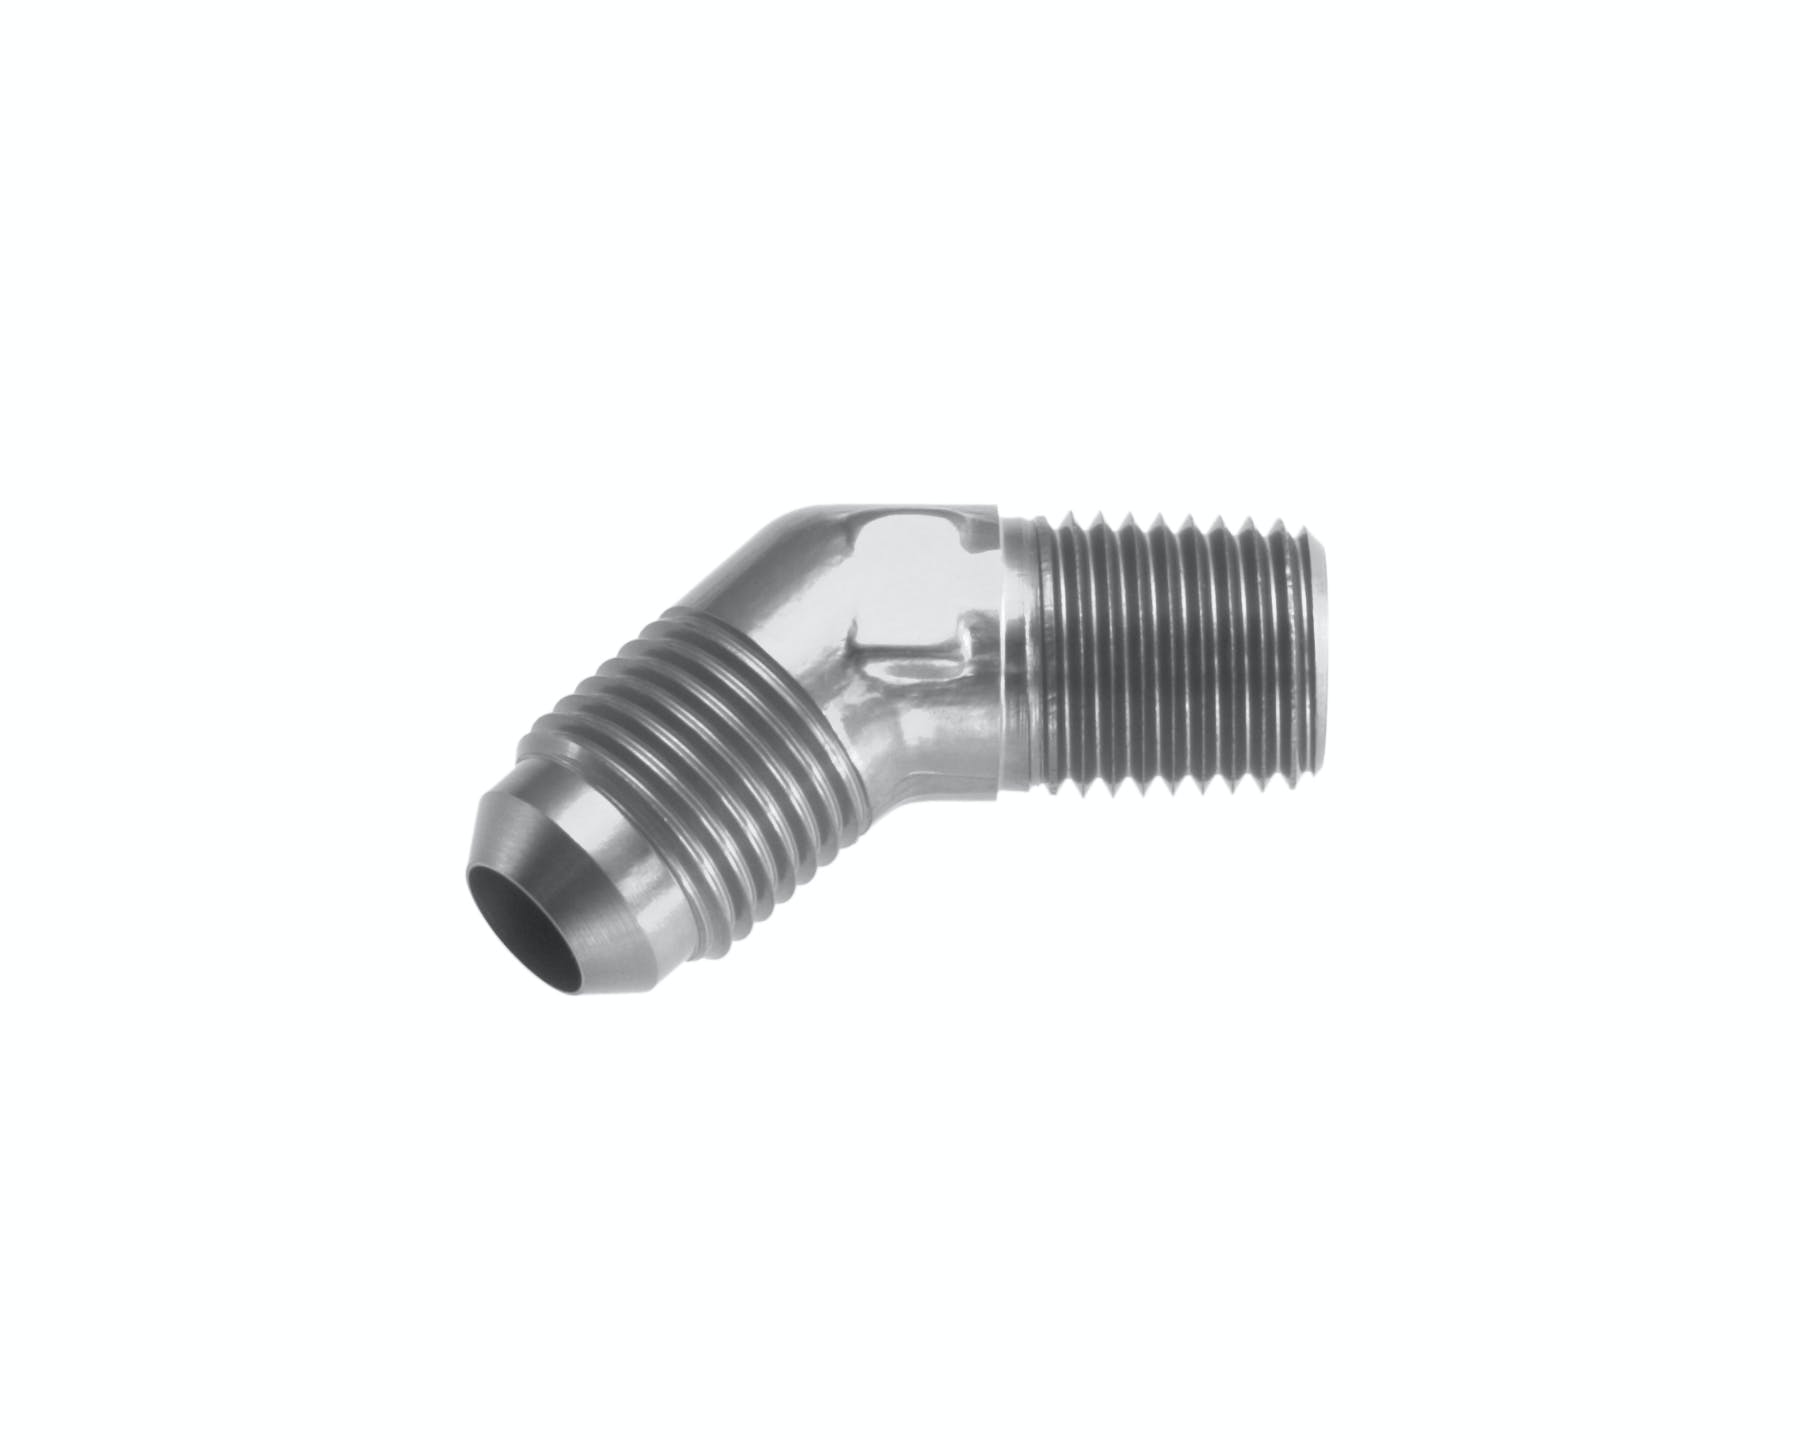 Redhorse Performance 823-10-06-5 -10 45 degree Male adapter to -06 (3/8in) NPT Male - clear